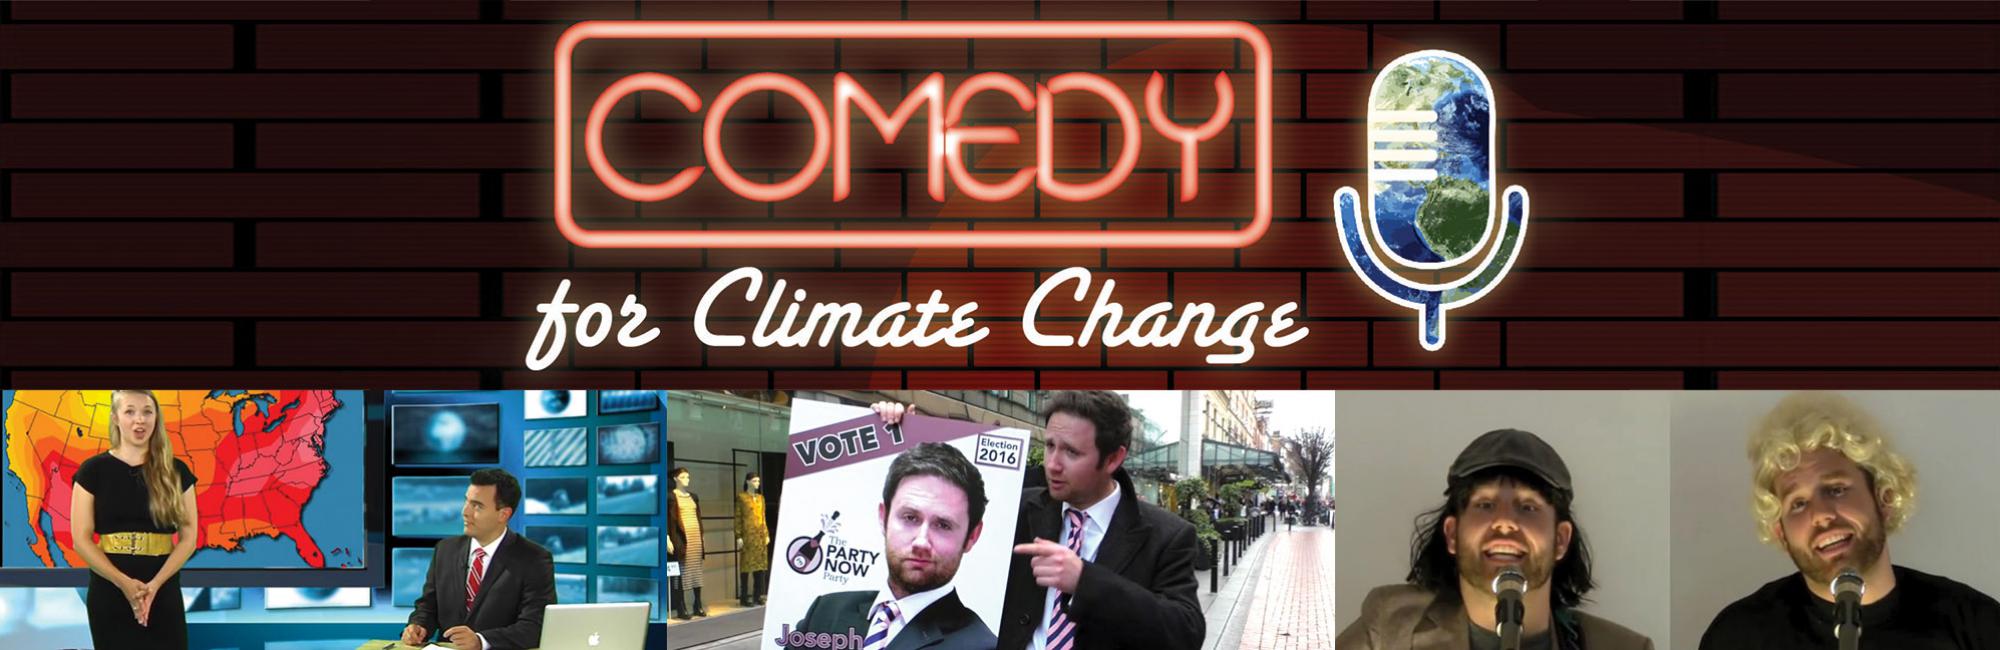 Winners Announced for Inside the Greenhouse Comedy & Climate Change Video Competition